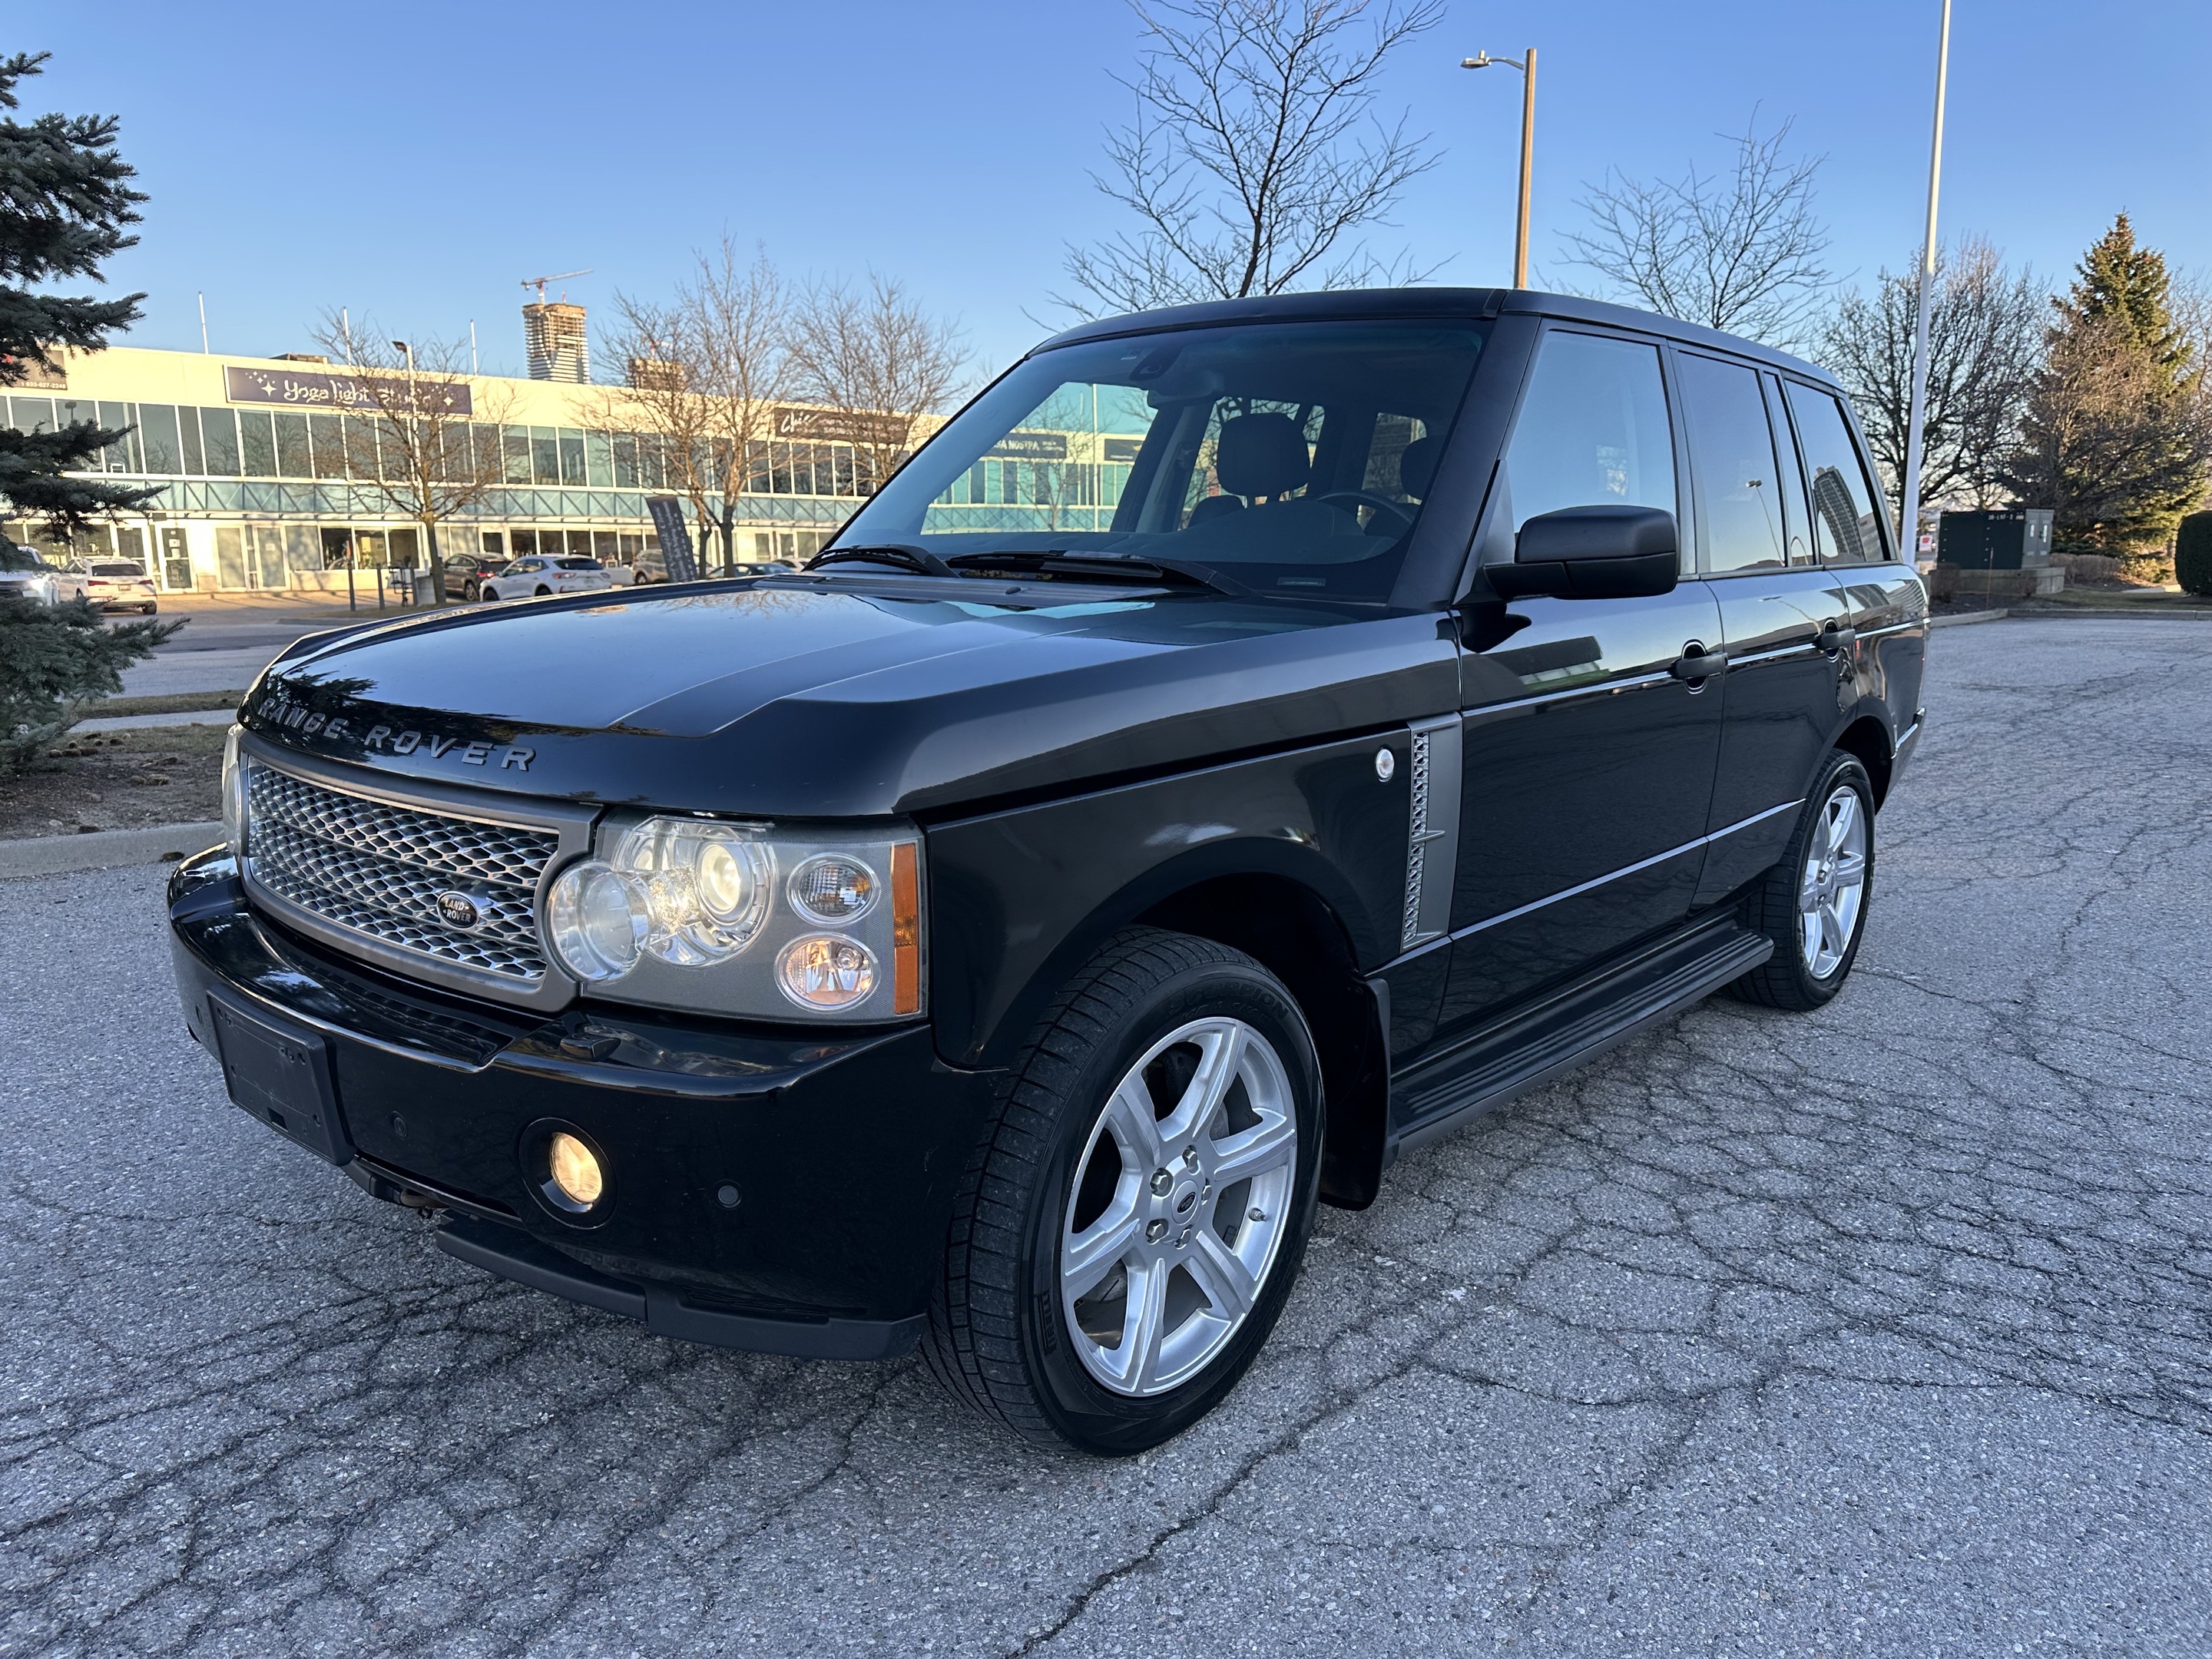 2008 Land Rover Range Rover | 4WD | Supercharged | 4.2L | V8 | HSE | 